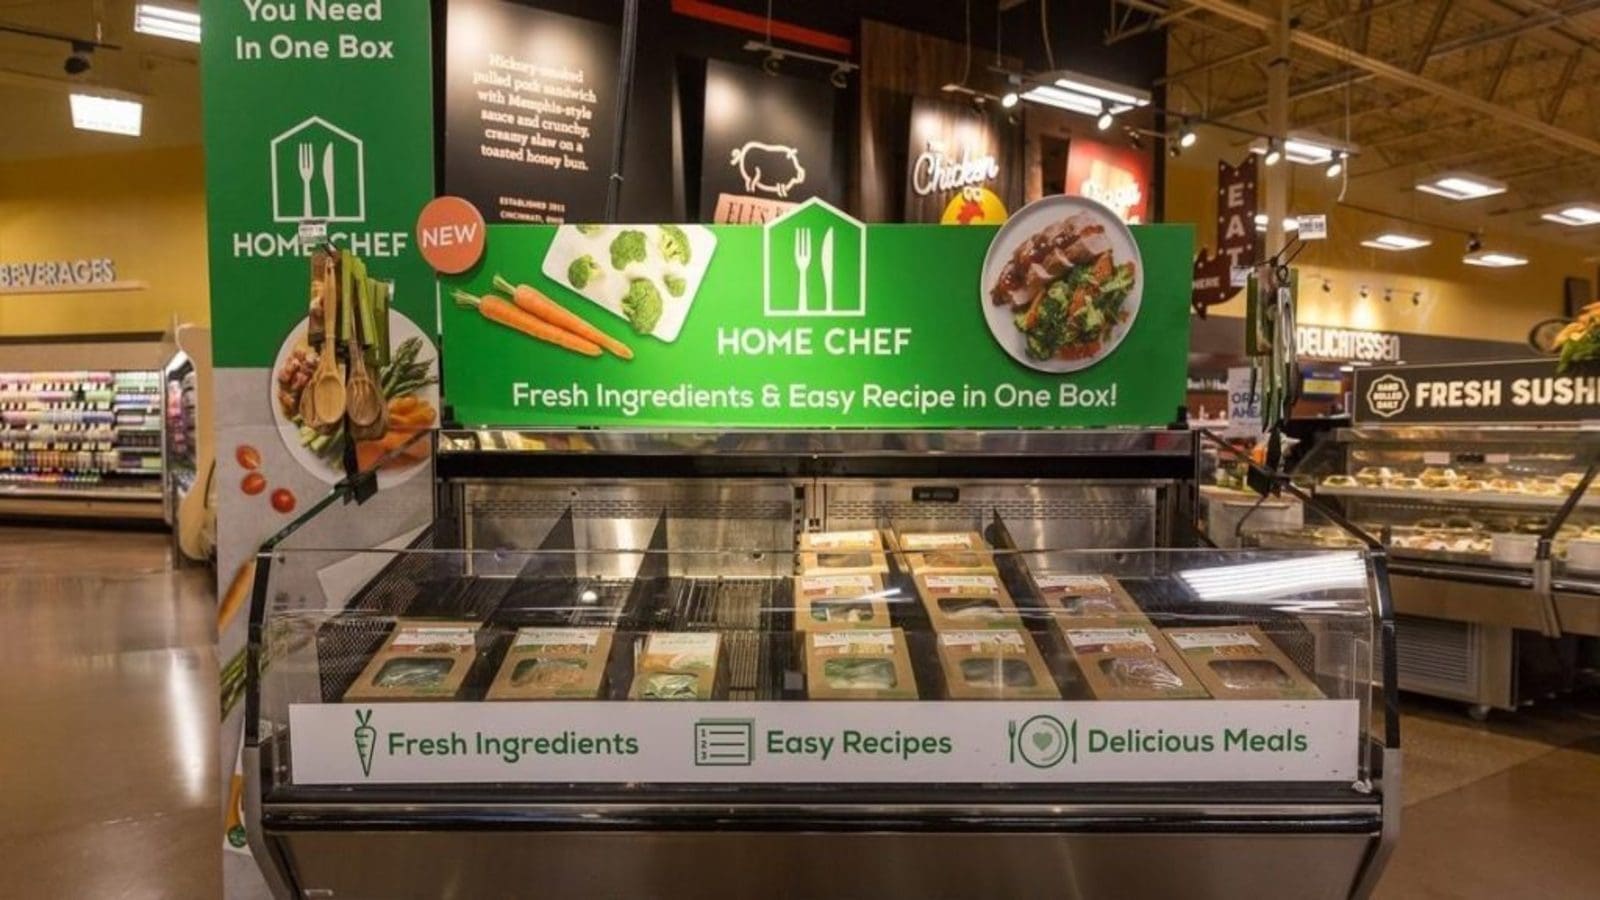 Kroger partners Impossible Foods to expand Home Chef brand into plant-based category 